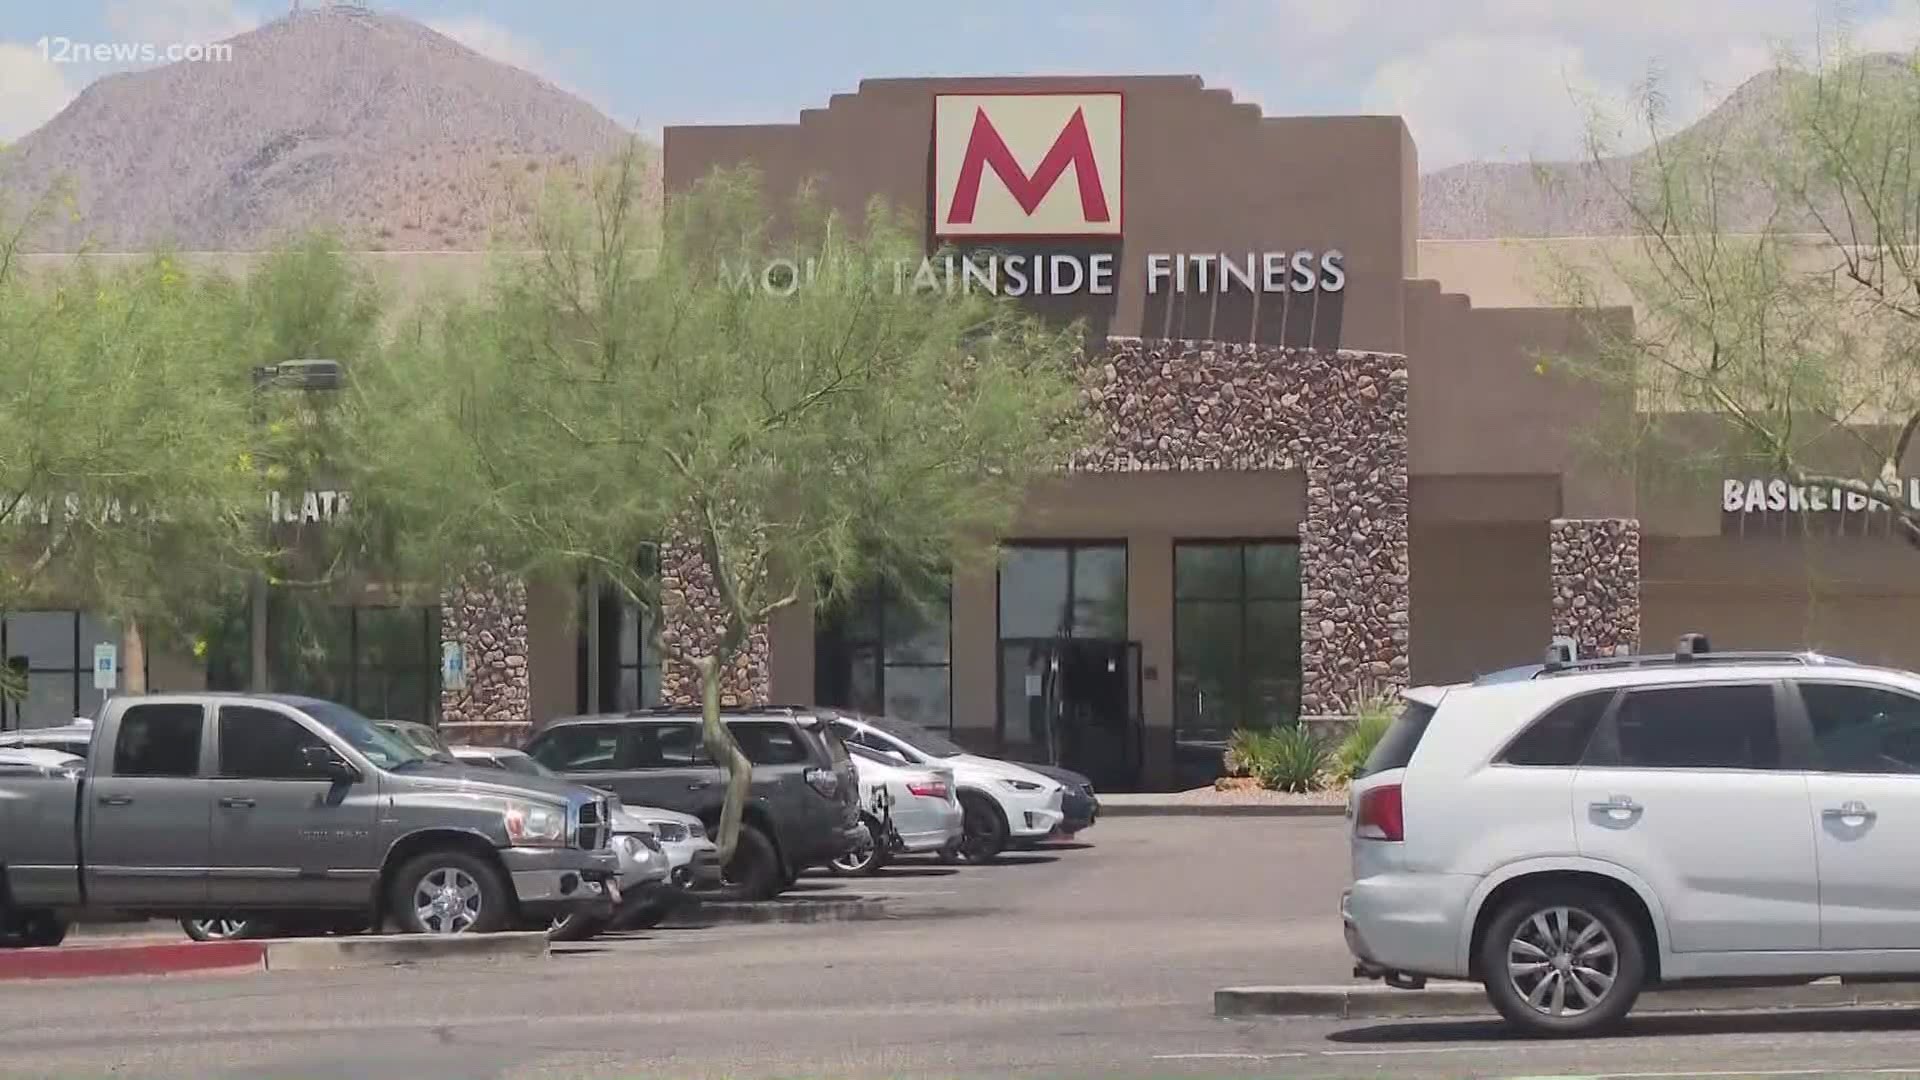 Mountainside Fitness, along with EOS Fitness were plaintiffs in the lawsuit filed against Arizona Gov. Doug Ducey.